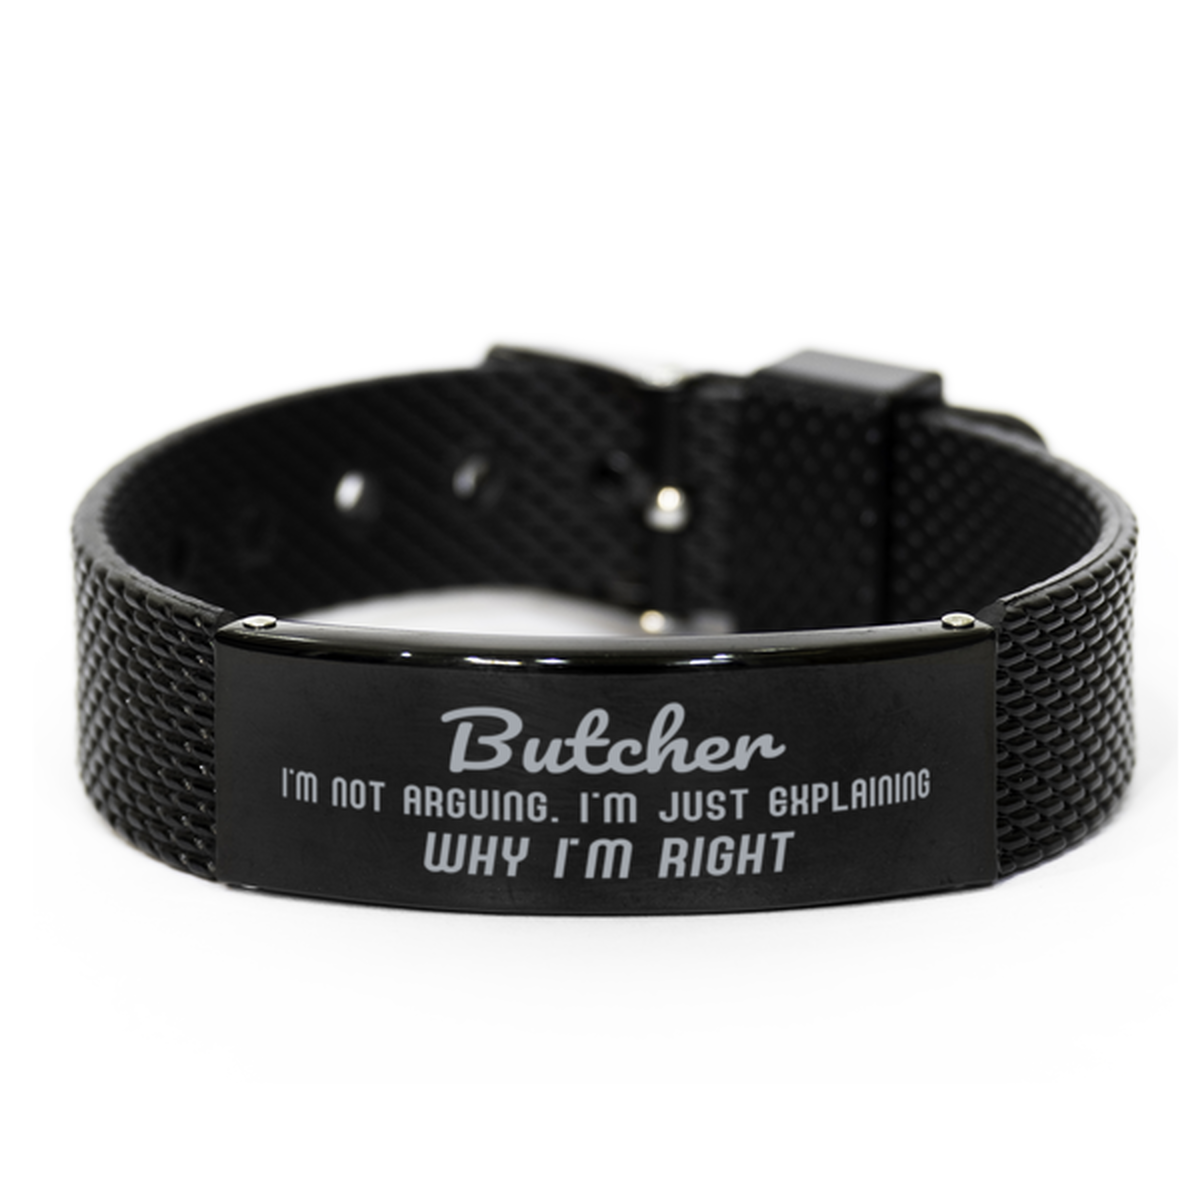 Butcher I'm not Arguing. I'm Just Explaining Why I'm RIGHT Black Shark Mesh Bracelet, Funny Saying Quote Butcher Gifts For Butcher Graduation Birthday Christmas Gifts for Men Women Coworker